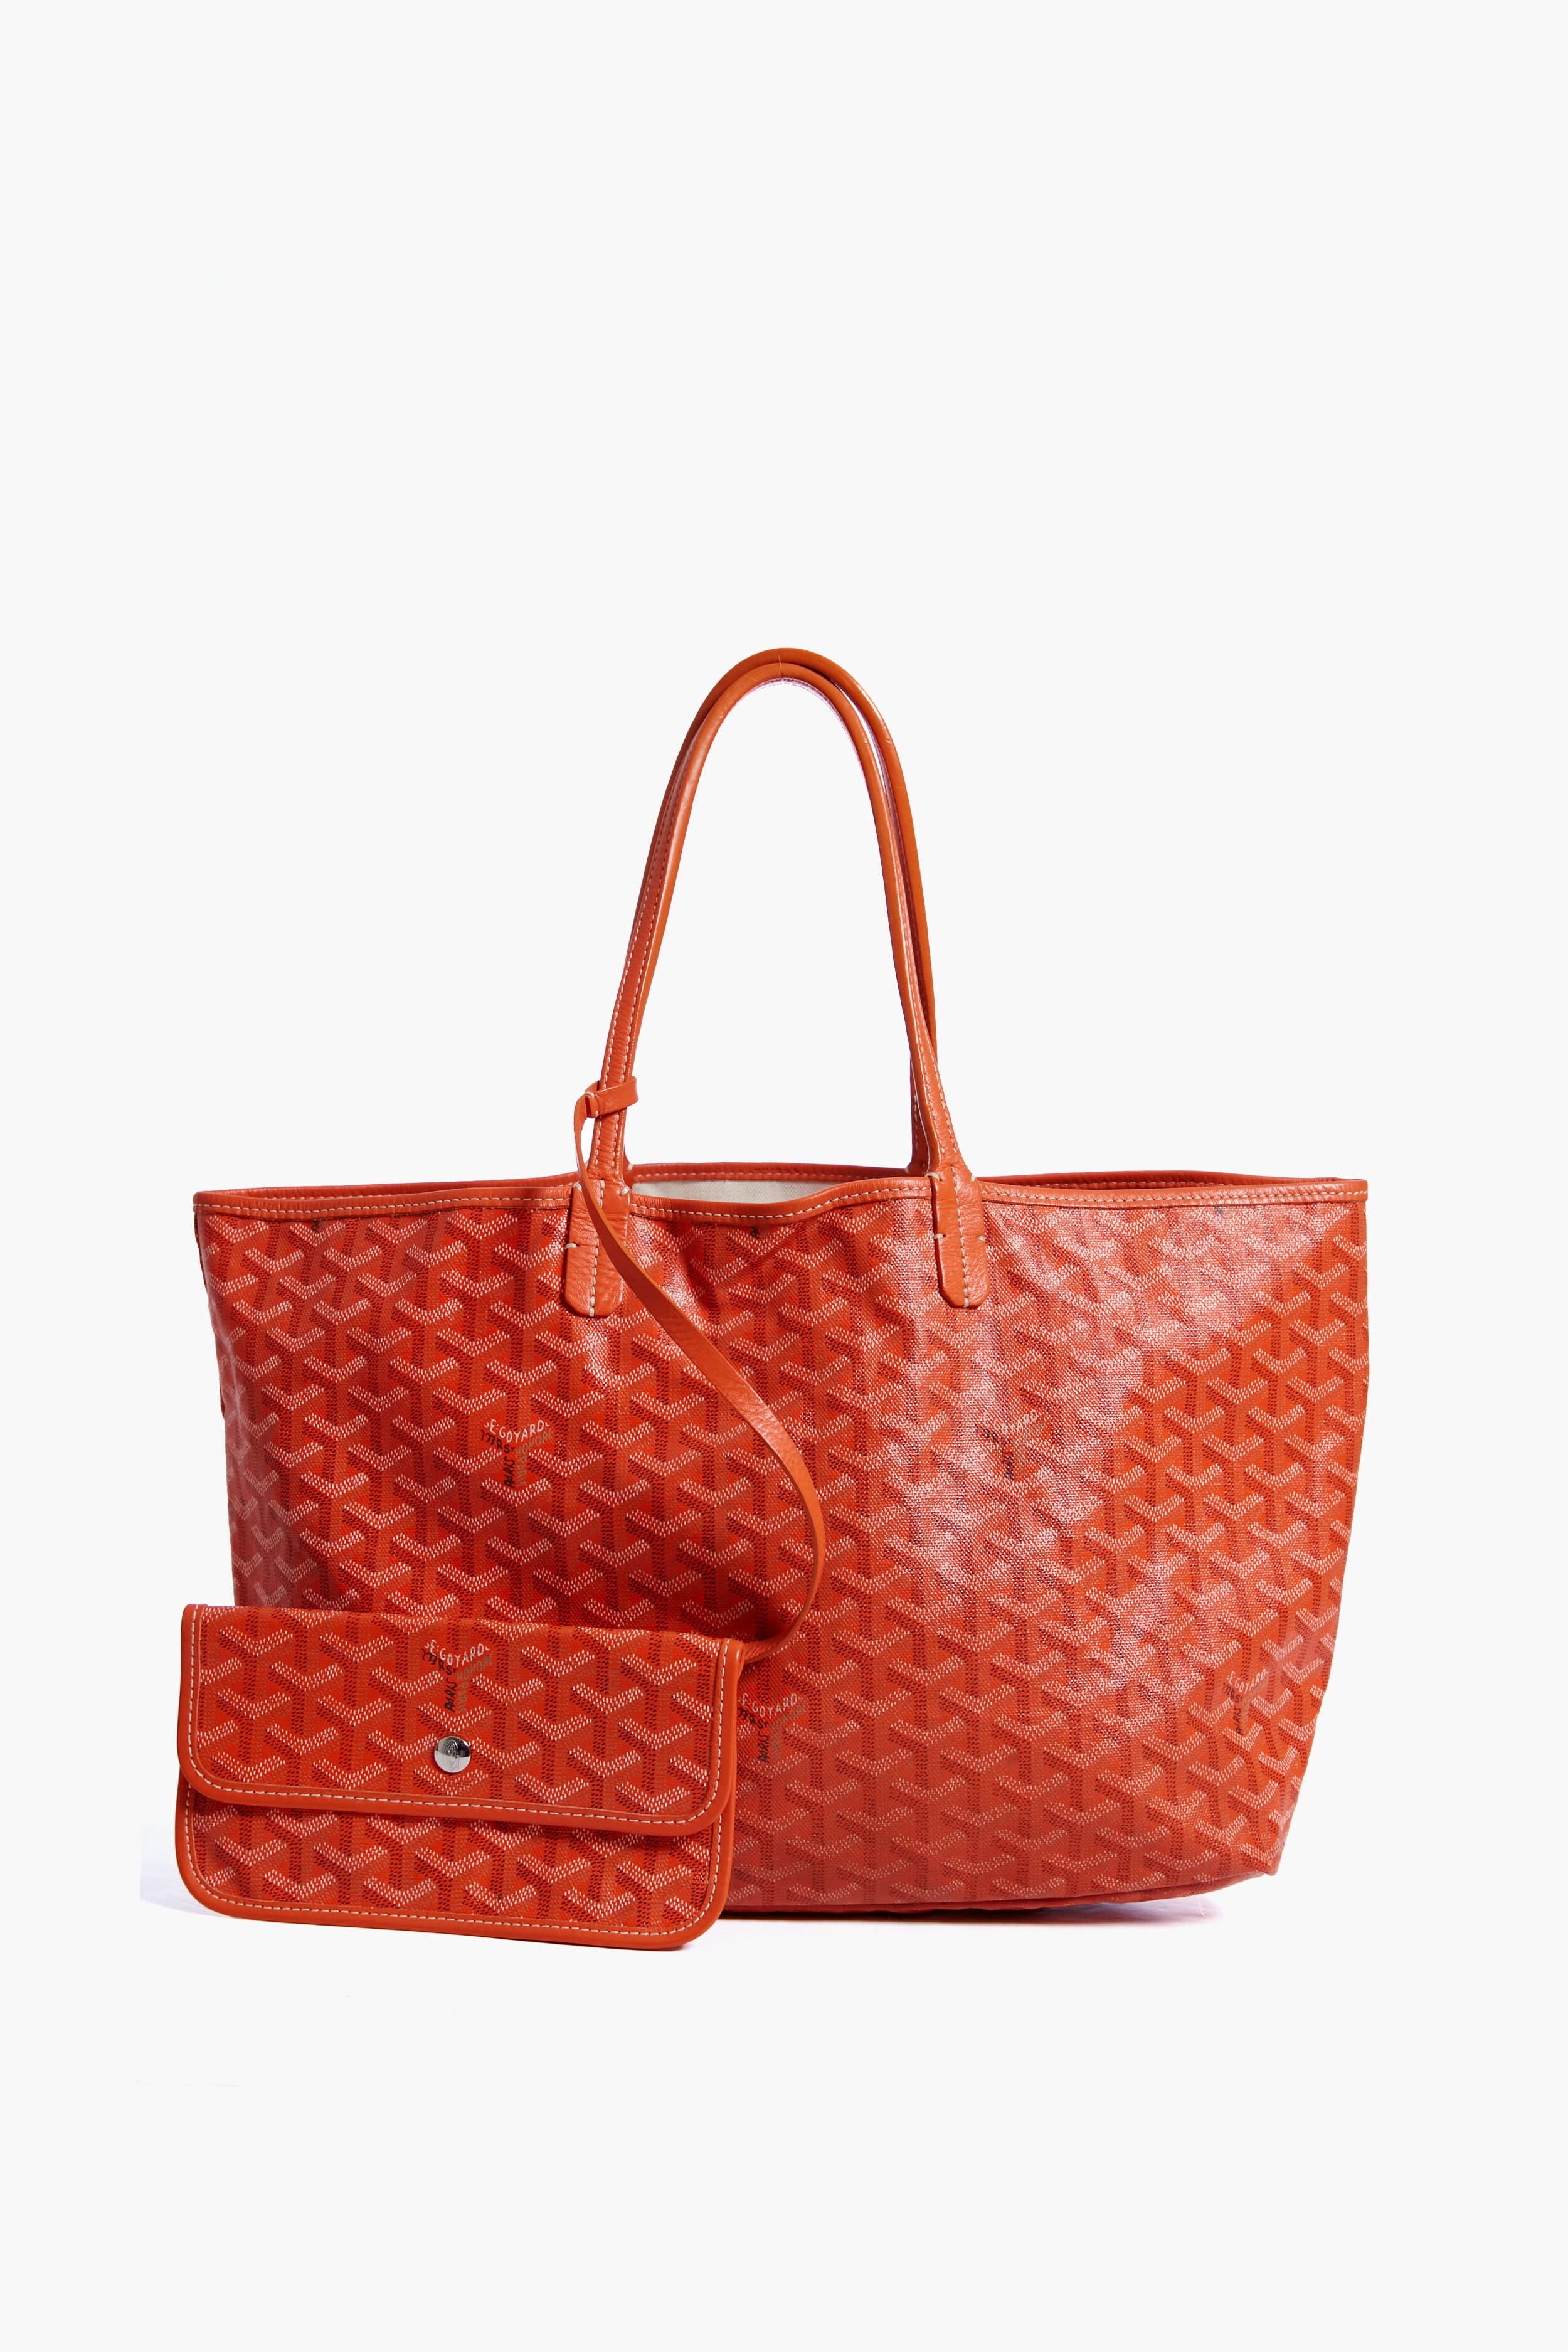 Goyard St Louis Pm with pouch and Entrupy Certificate of